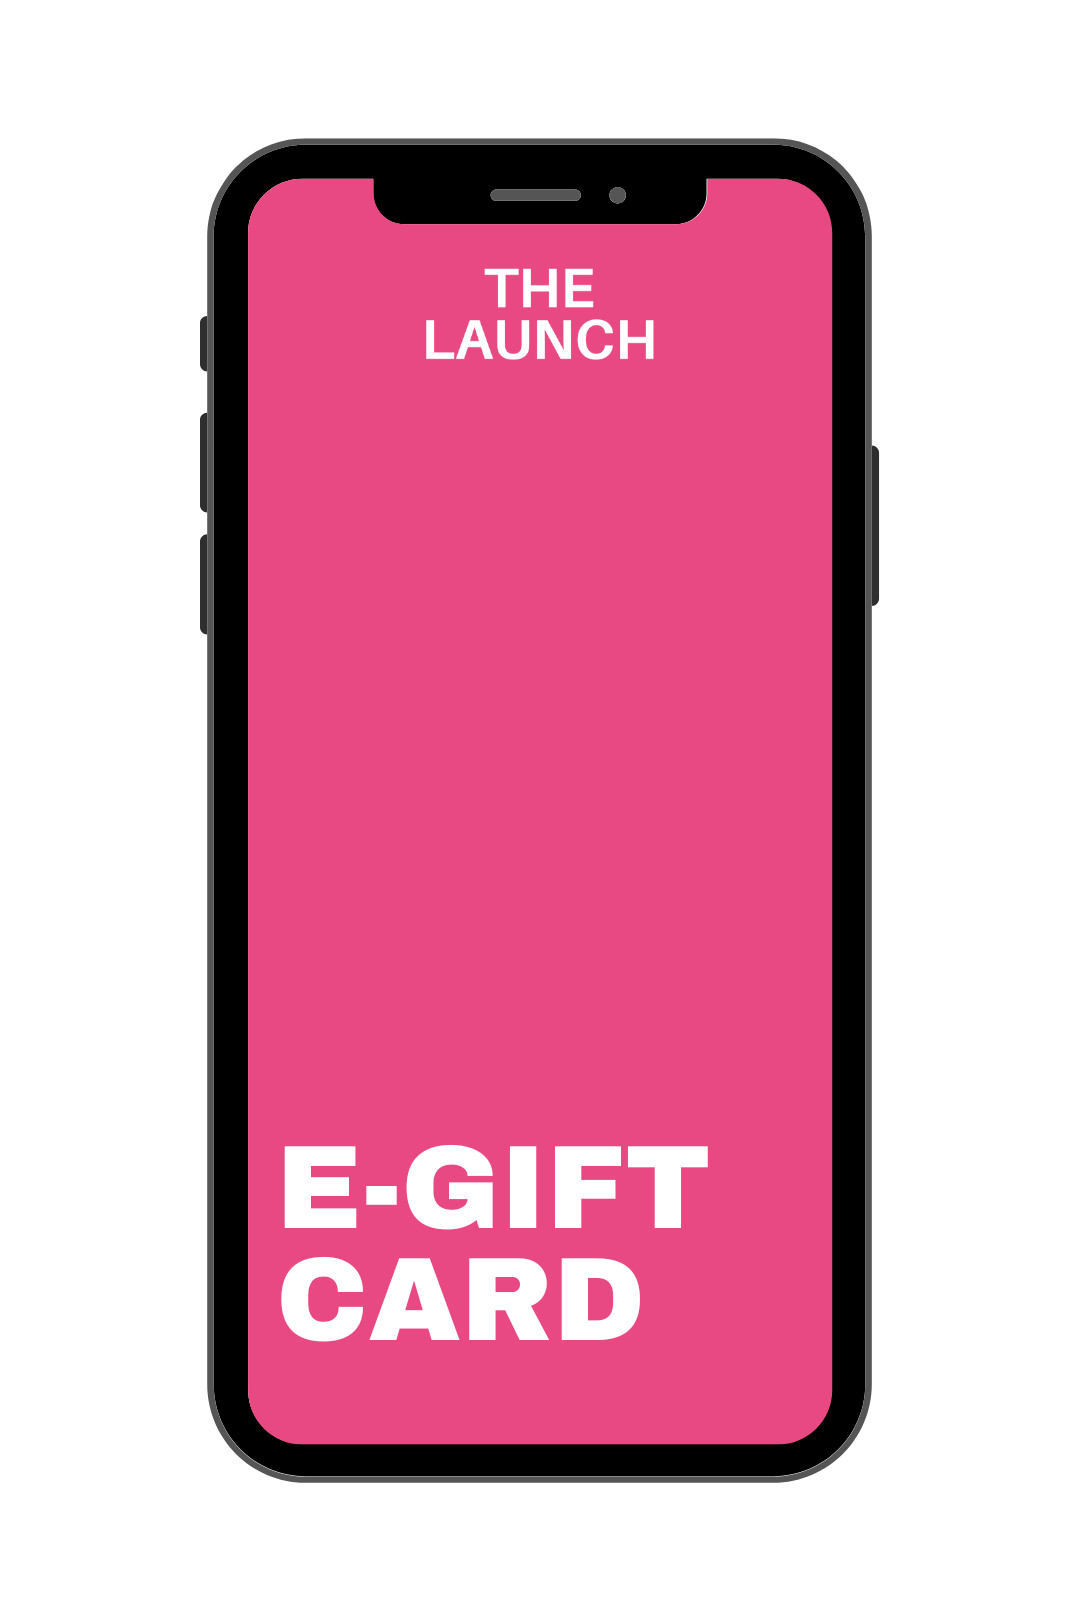 THE LAUNCH GIFT CARD